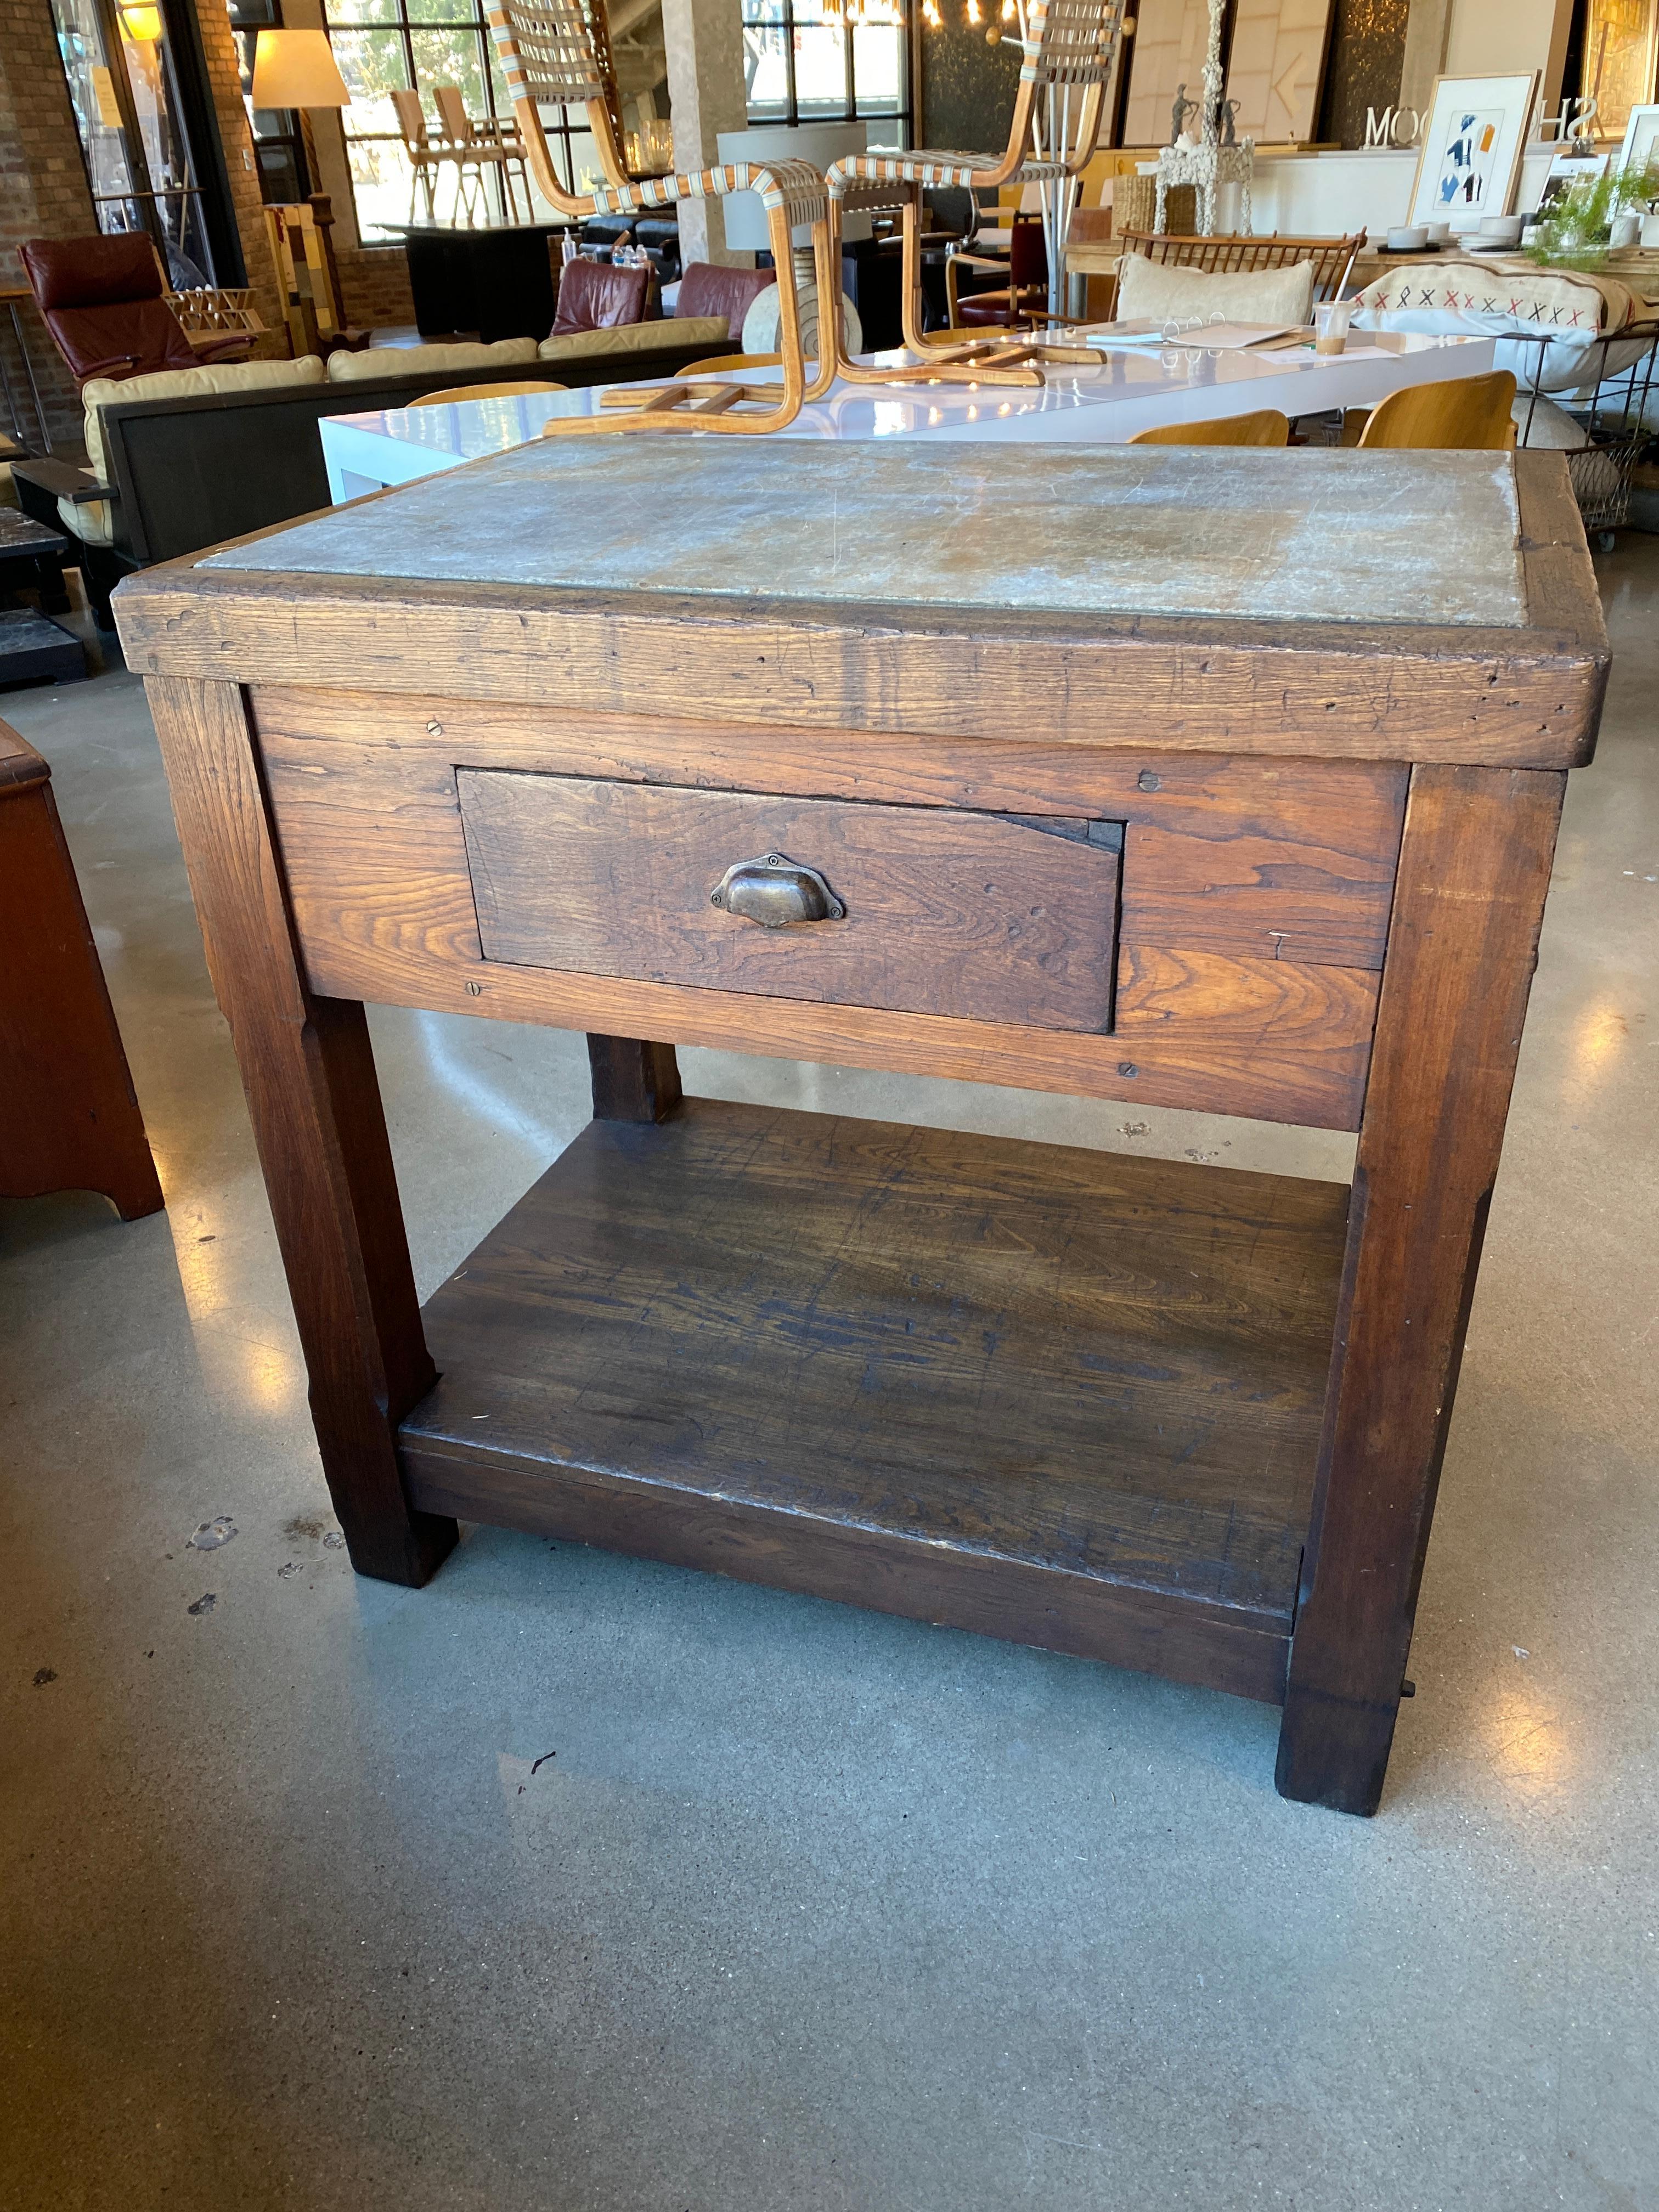 Substantially crafted work table, butcher block or island of solid oak with inset soapstone top and with one-drawer that slides between both sides. Could make beautiful center table or dry bar, Belgium, 19th century.